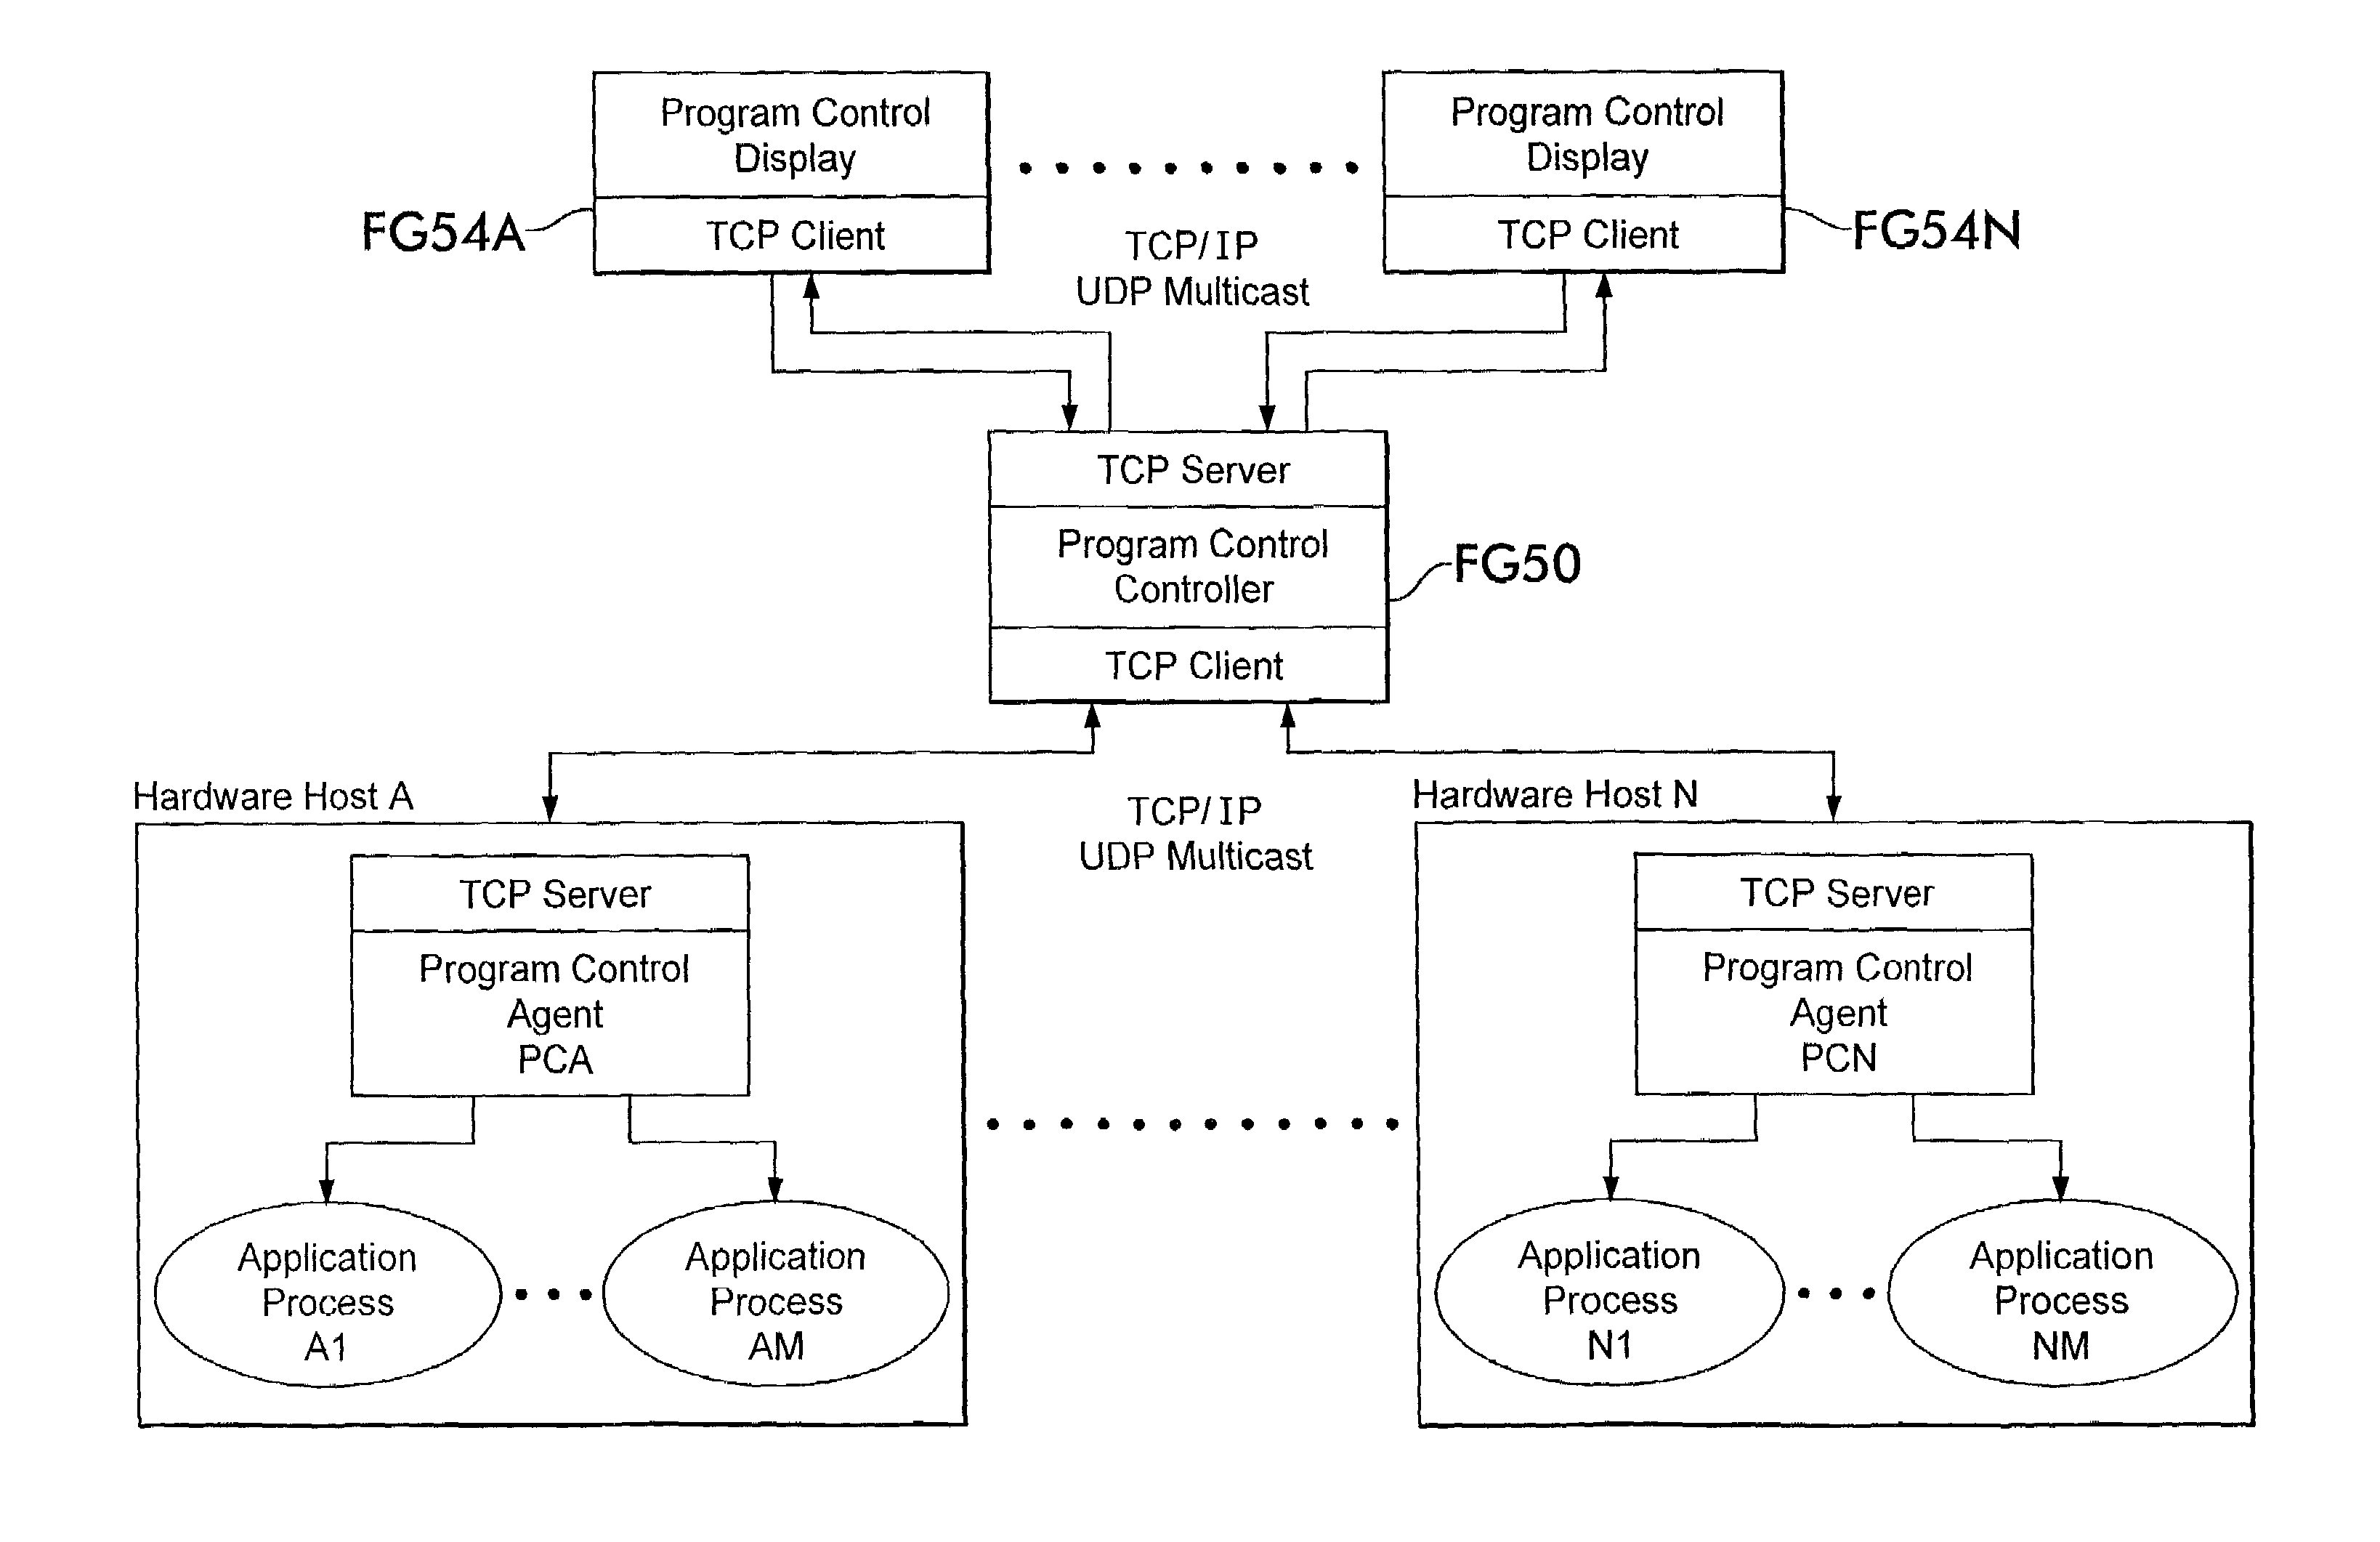 System for monitoring and reporting performance of hosts and applications and selectively configuring applications in a resource managed system